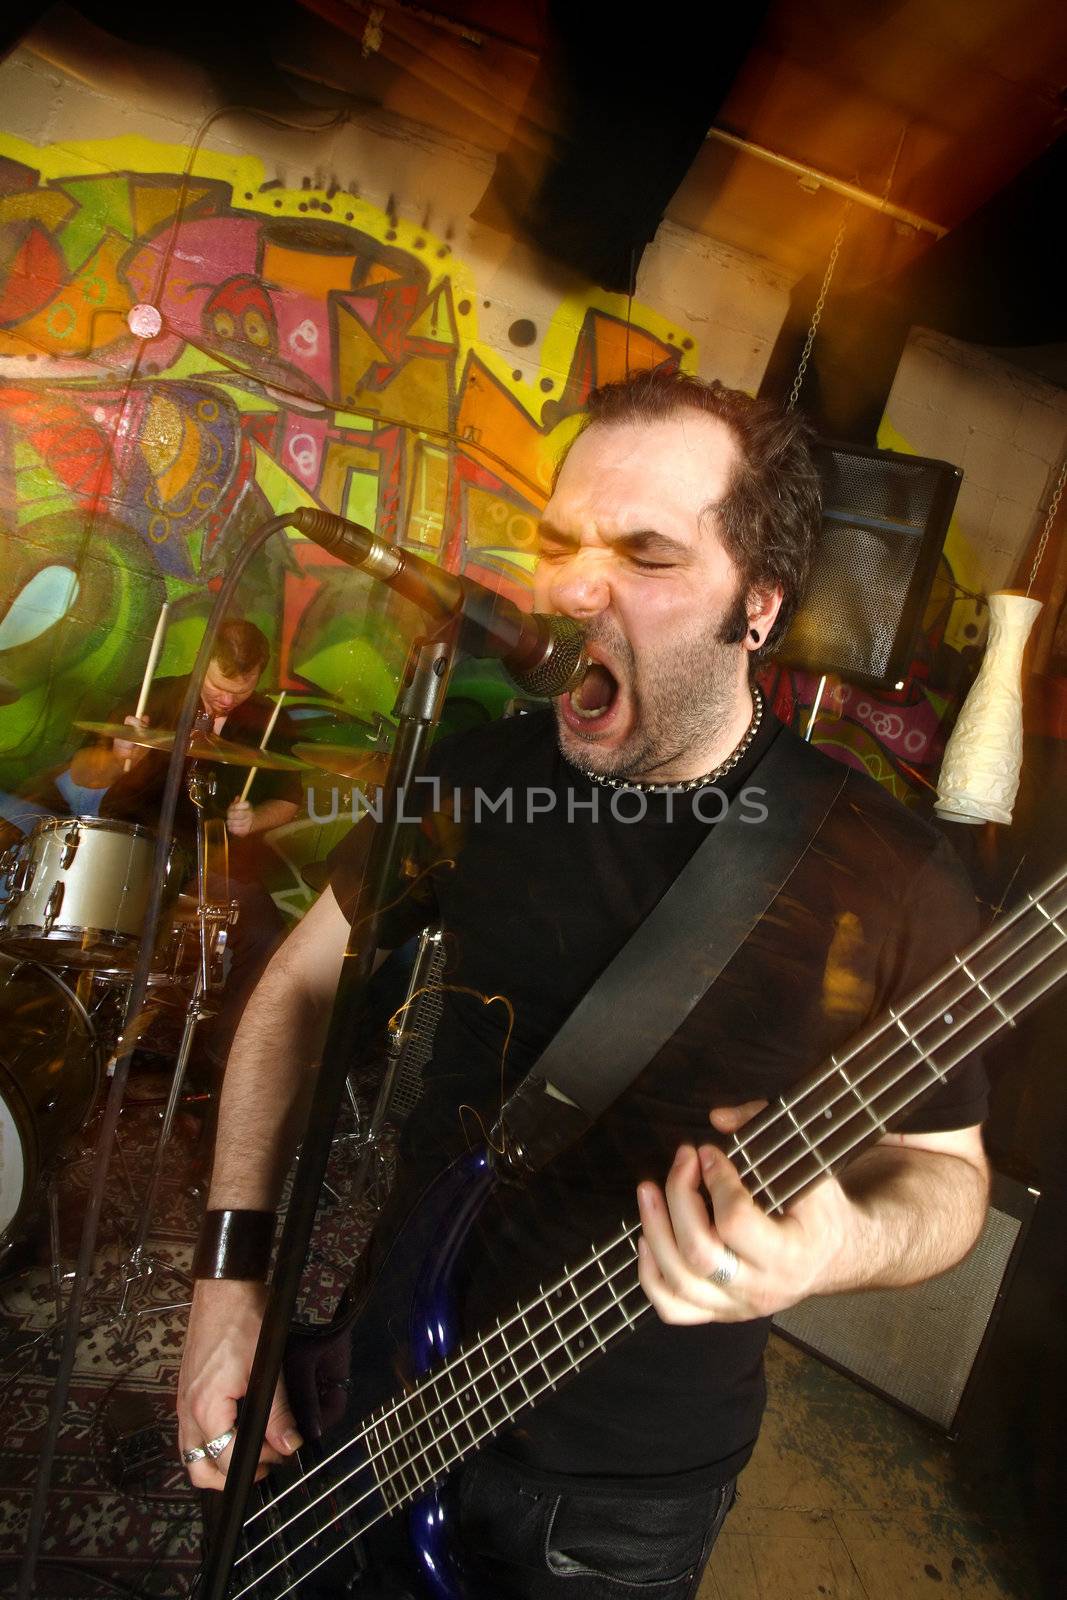 Metal singer cussing into the microphone.  Shot with strobes and slow shutter speed to create lighting atmosphere and blur effects.
